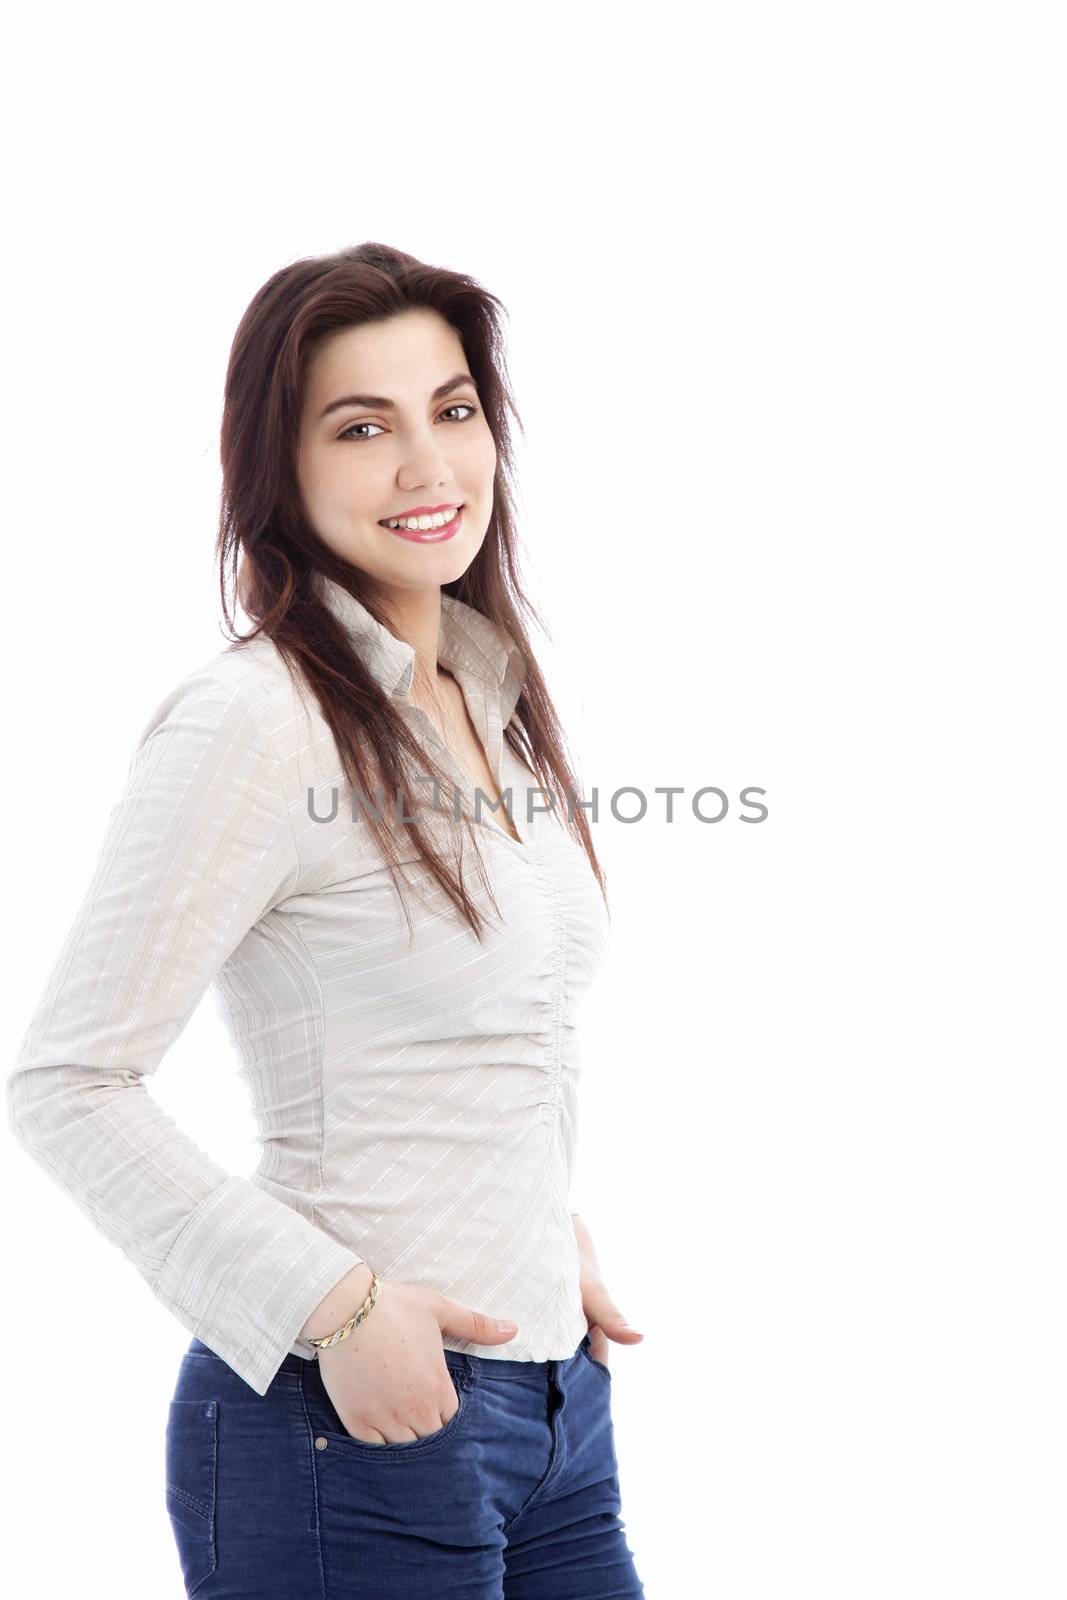 Smiling casual woman in jeans by Farina6000